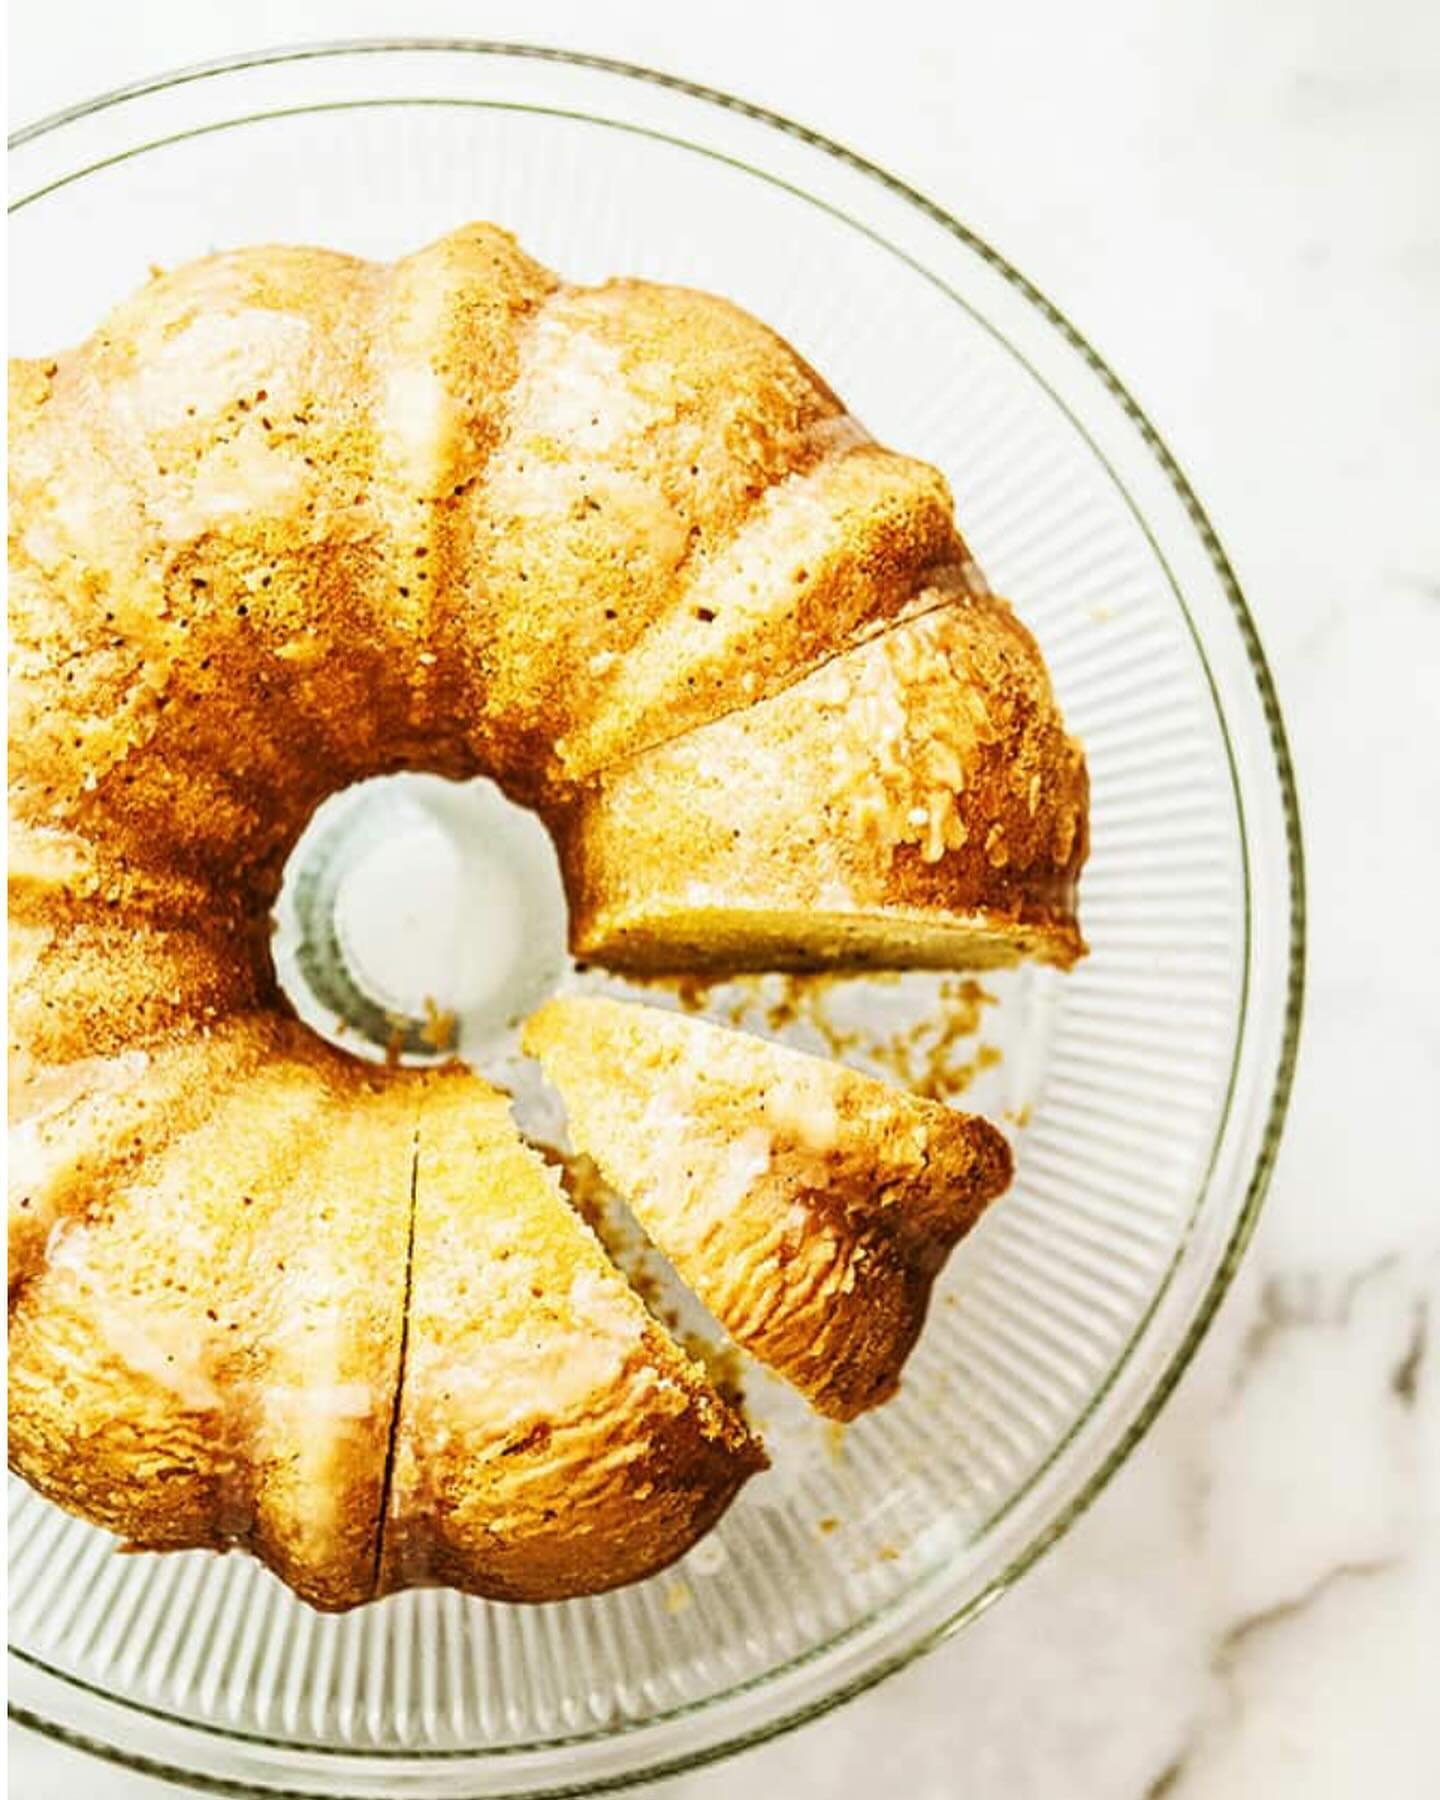 BEAUTIFUL FOOD BY DESIGN | Rosemary &amp; Olive Oil Bundt Cake 
All recipe roads lead me back to Chez Pannise, and to the incredible recipes from chefs born out of this legendary restaurant-Italian Rosemary Cake&ndash;No. 539 from the Membership Coll